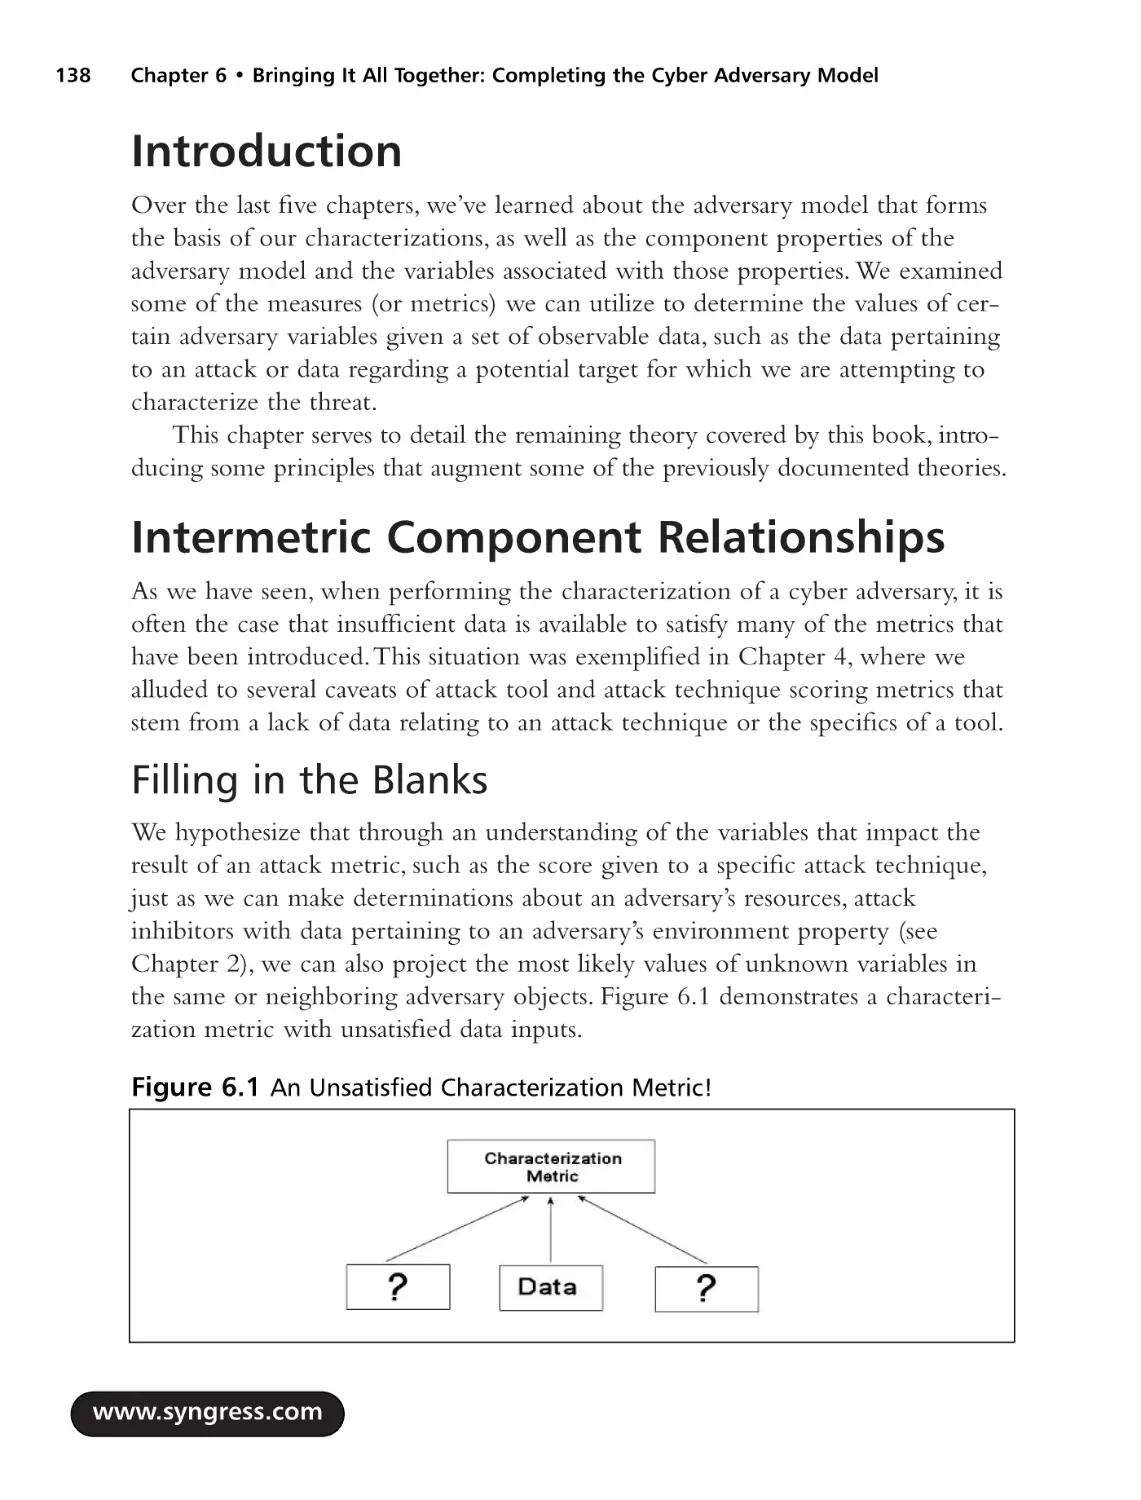 Introduction
Intermetric Component Relationships
Filling in the Blanks